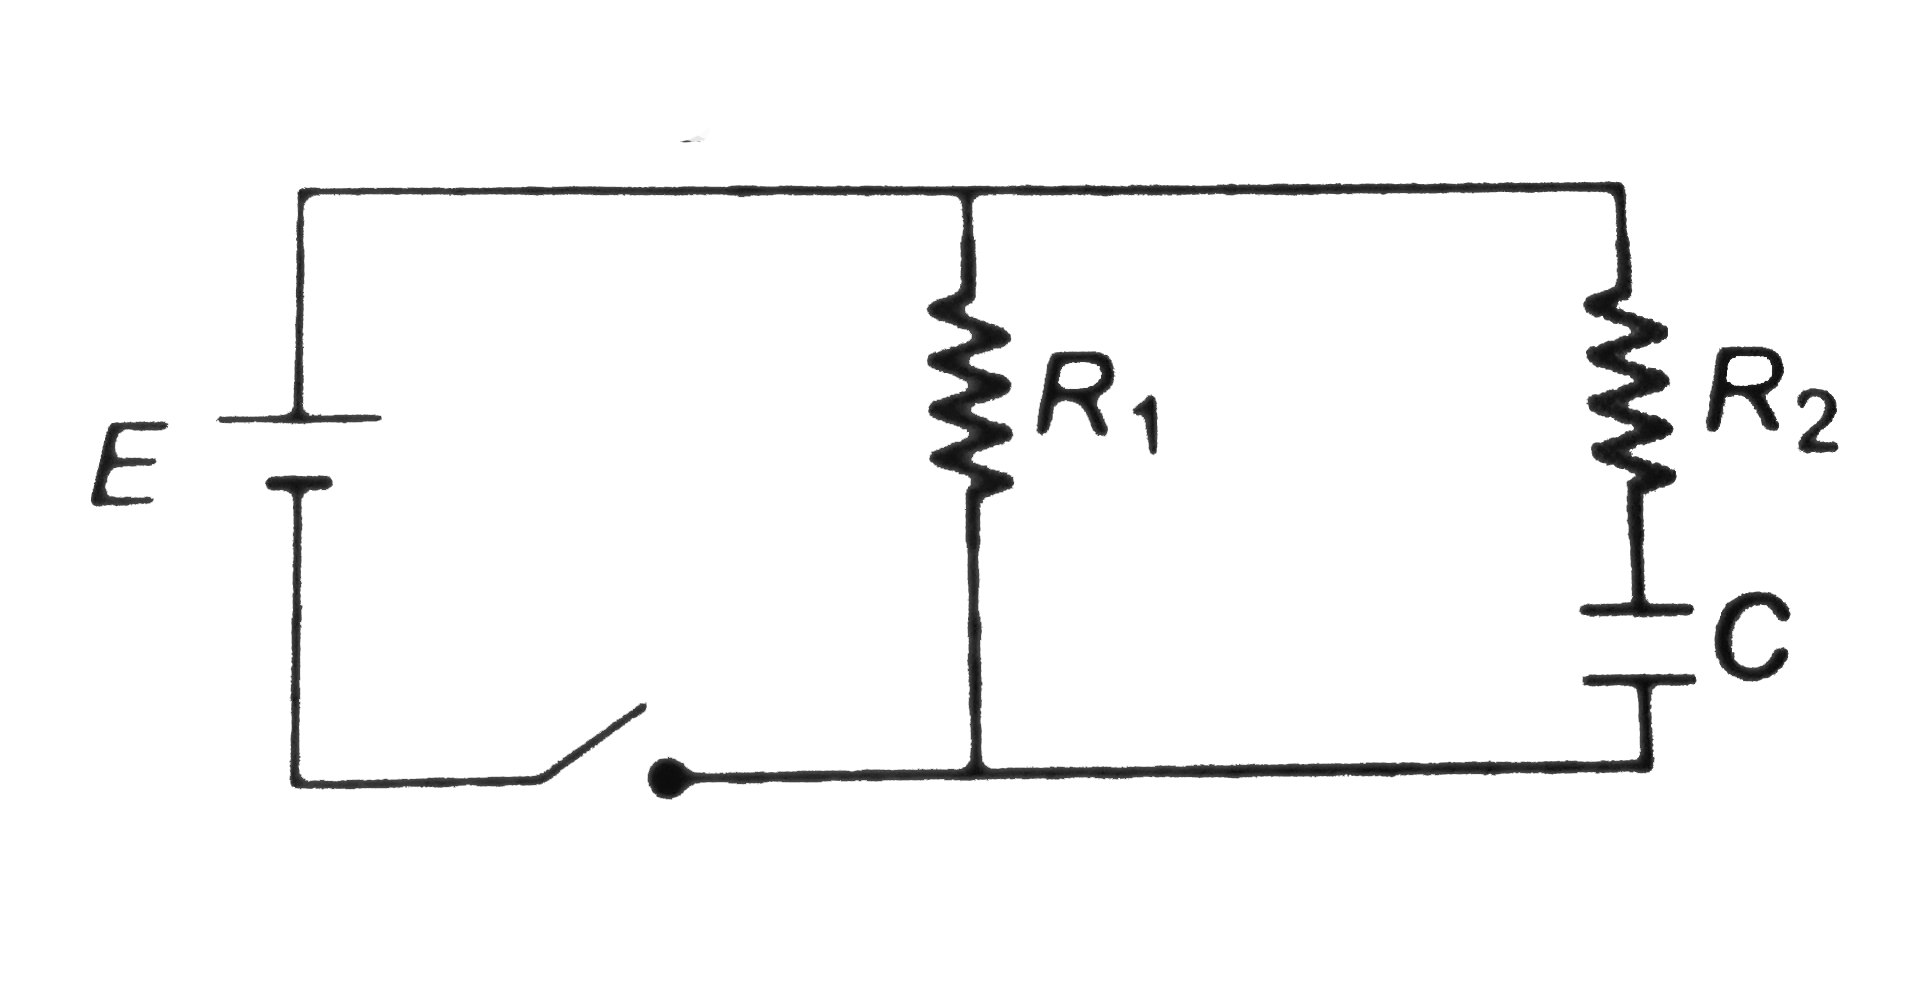 For the circuit shown in figure, find   (a) the initial current through each resistor   (b) steady state current through each resistor   (c) final energy stored in the capacitor   (d) time constant of the circuit when switch is opened.